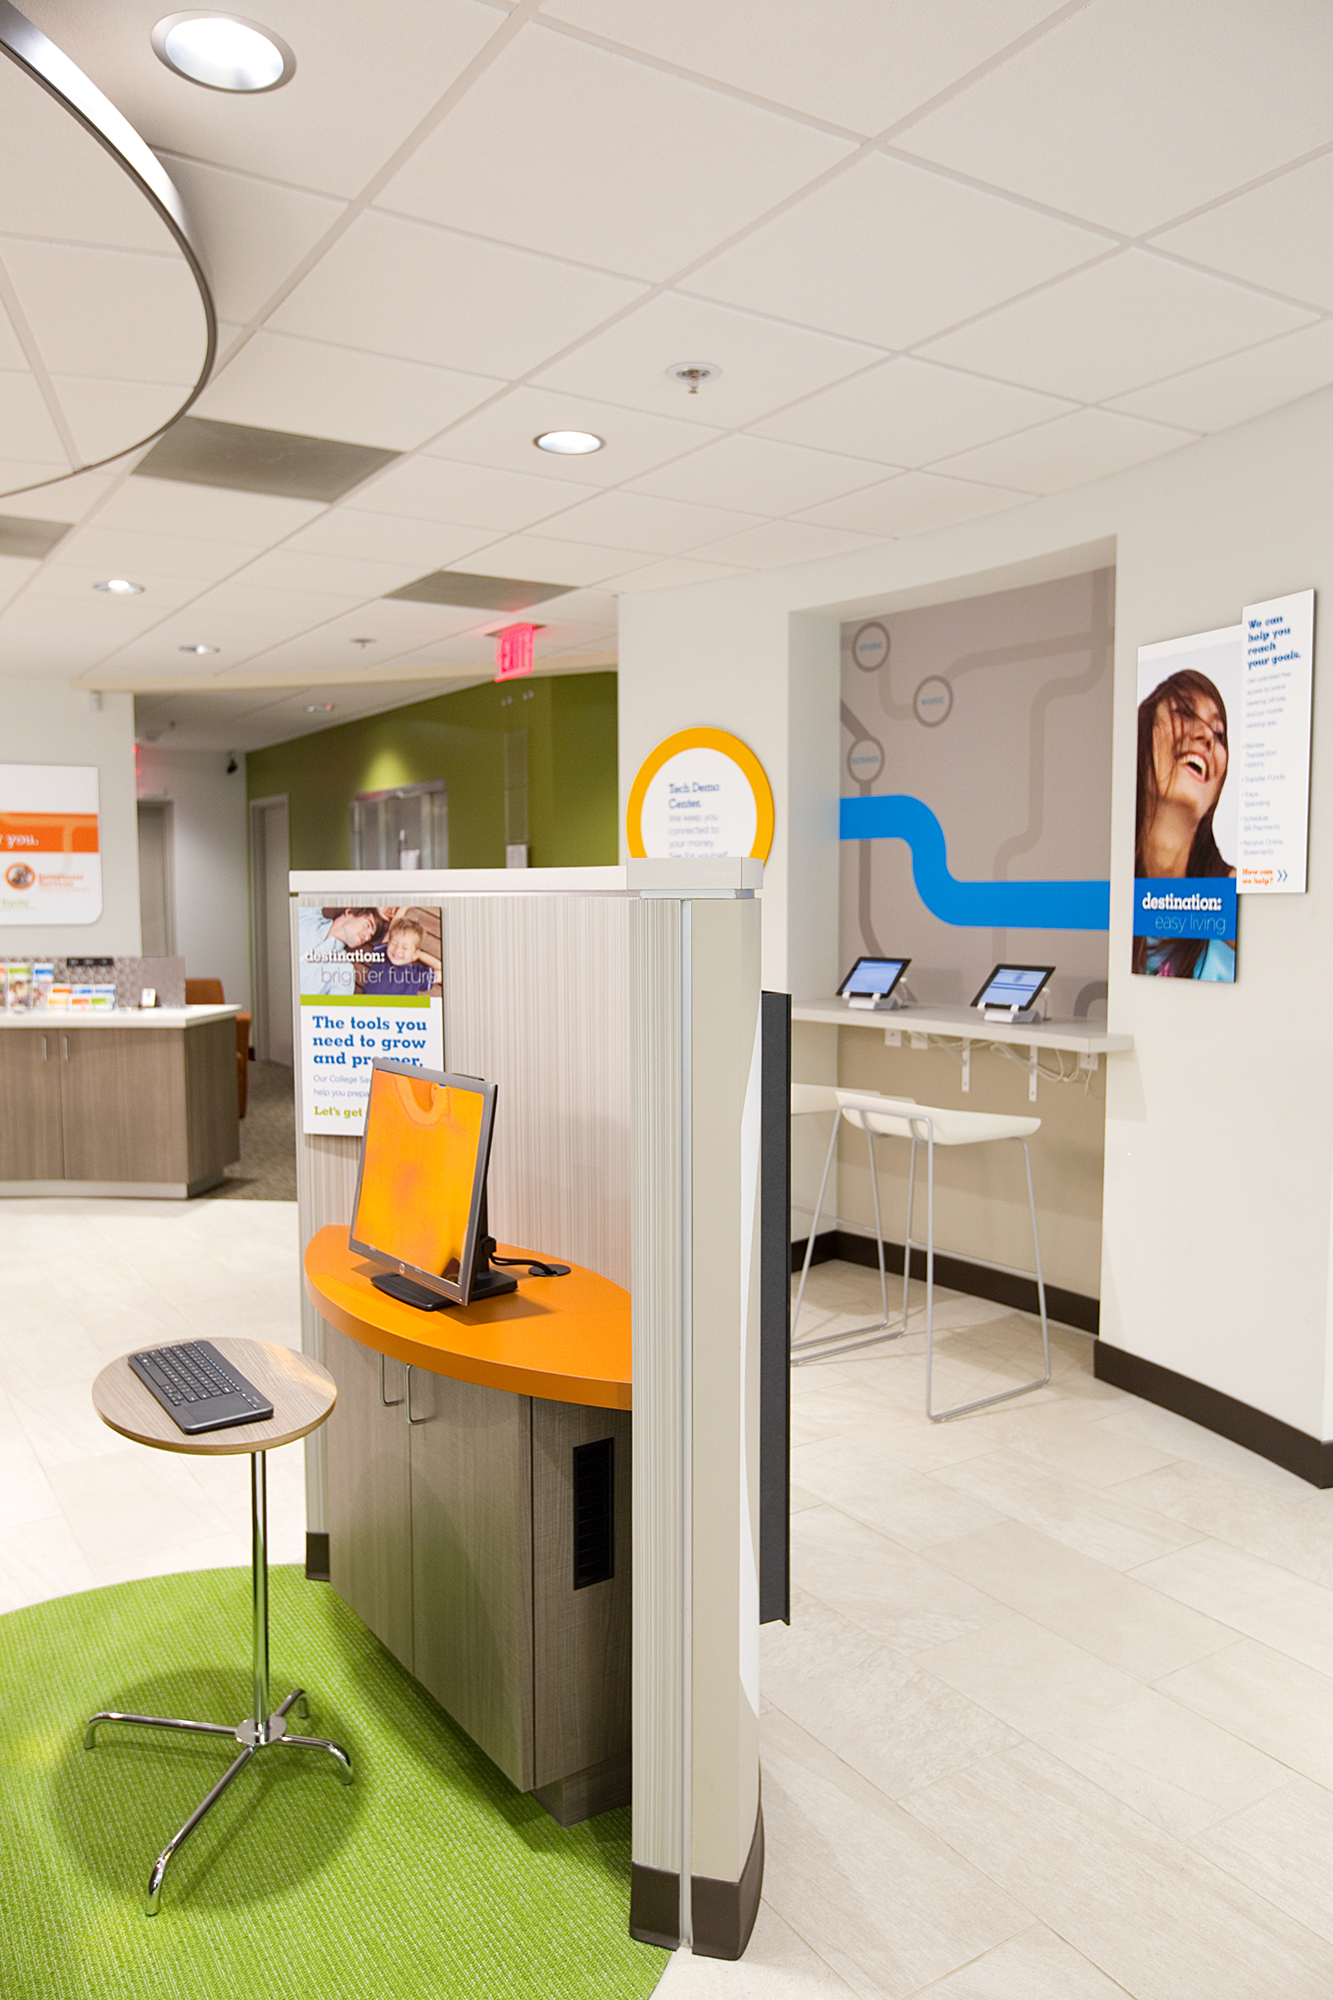 This new branch features tablet banking stations and highlights of their “buy local” business program with the roadmap symbols.